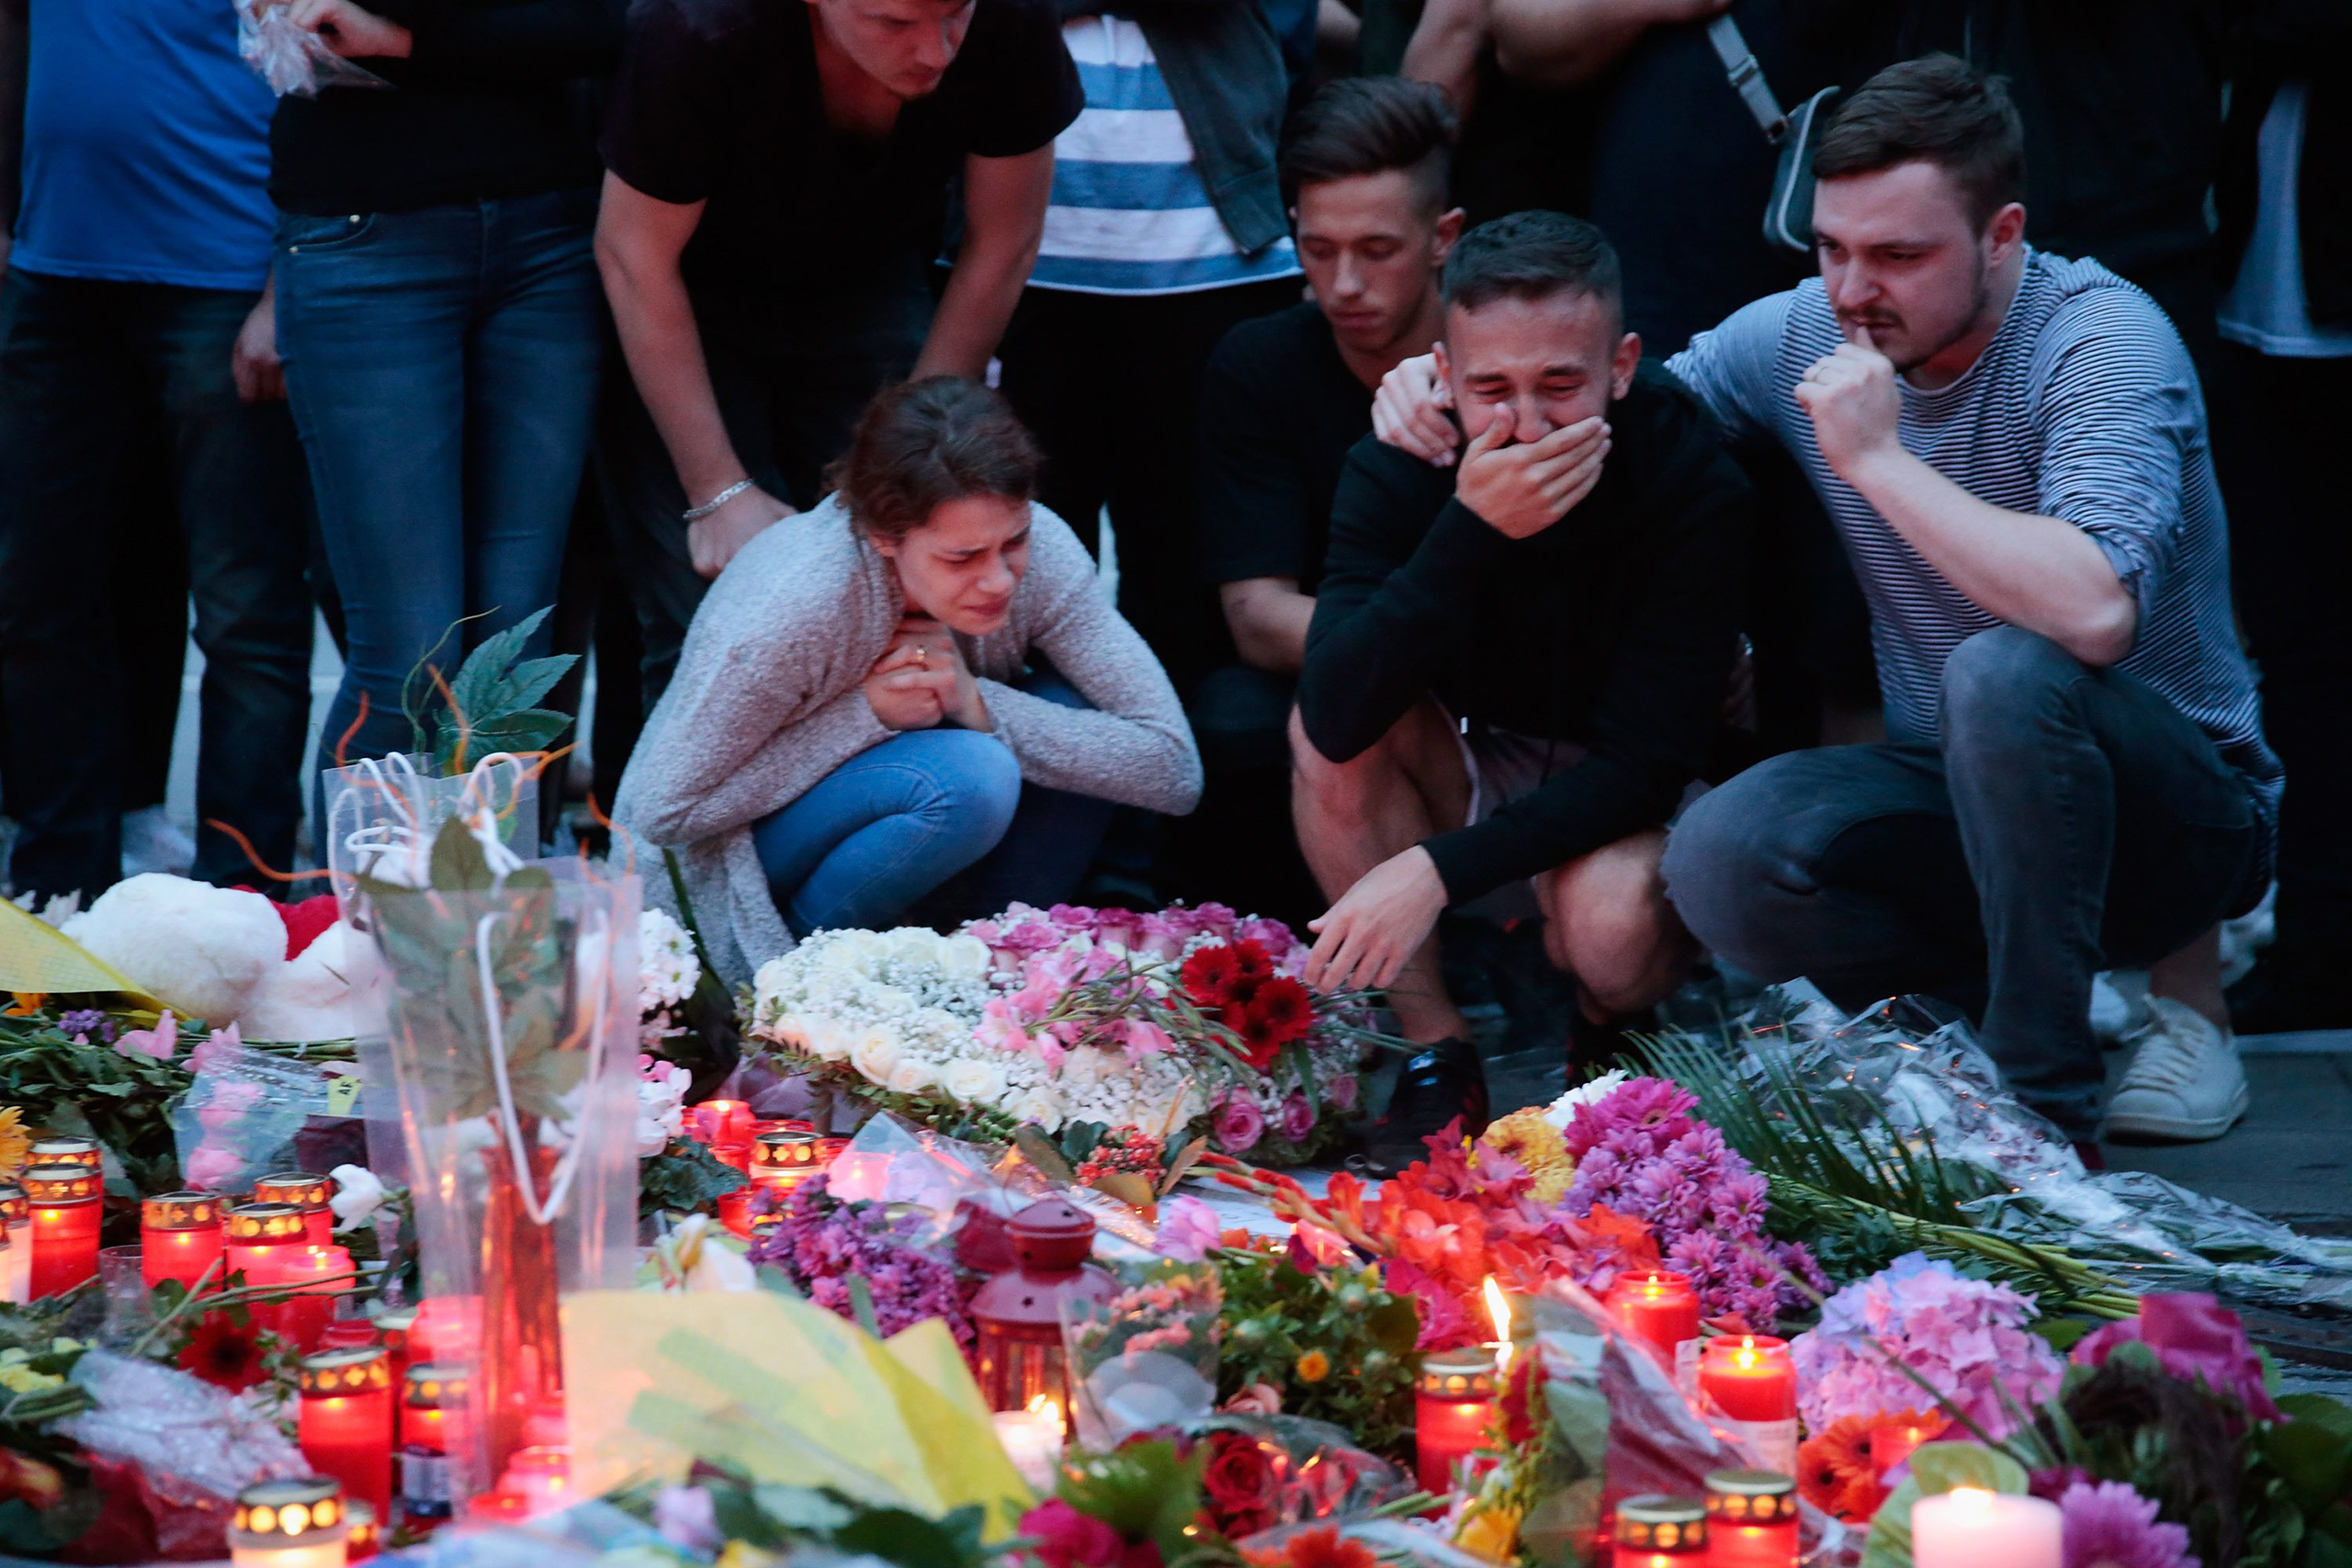 People mourn near the crime scene at OEZ shopping center the day after a shooting spree left nine victims dead in Munich, Germany, on July 23, 2016. (Johannes Simon—Getty Images)